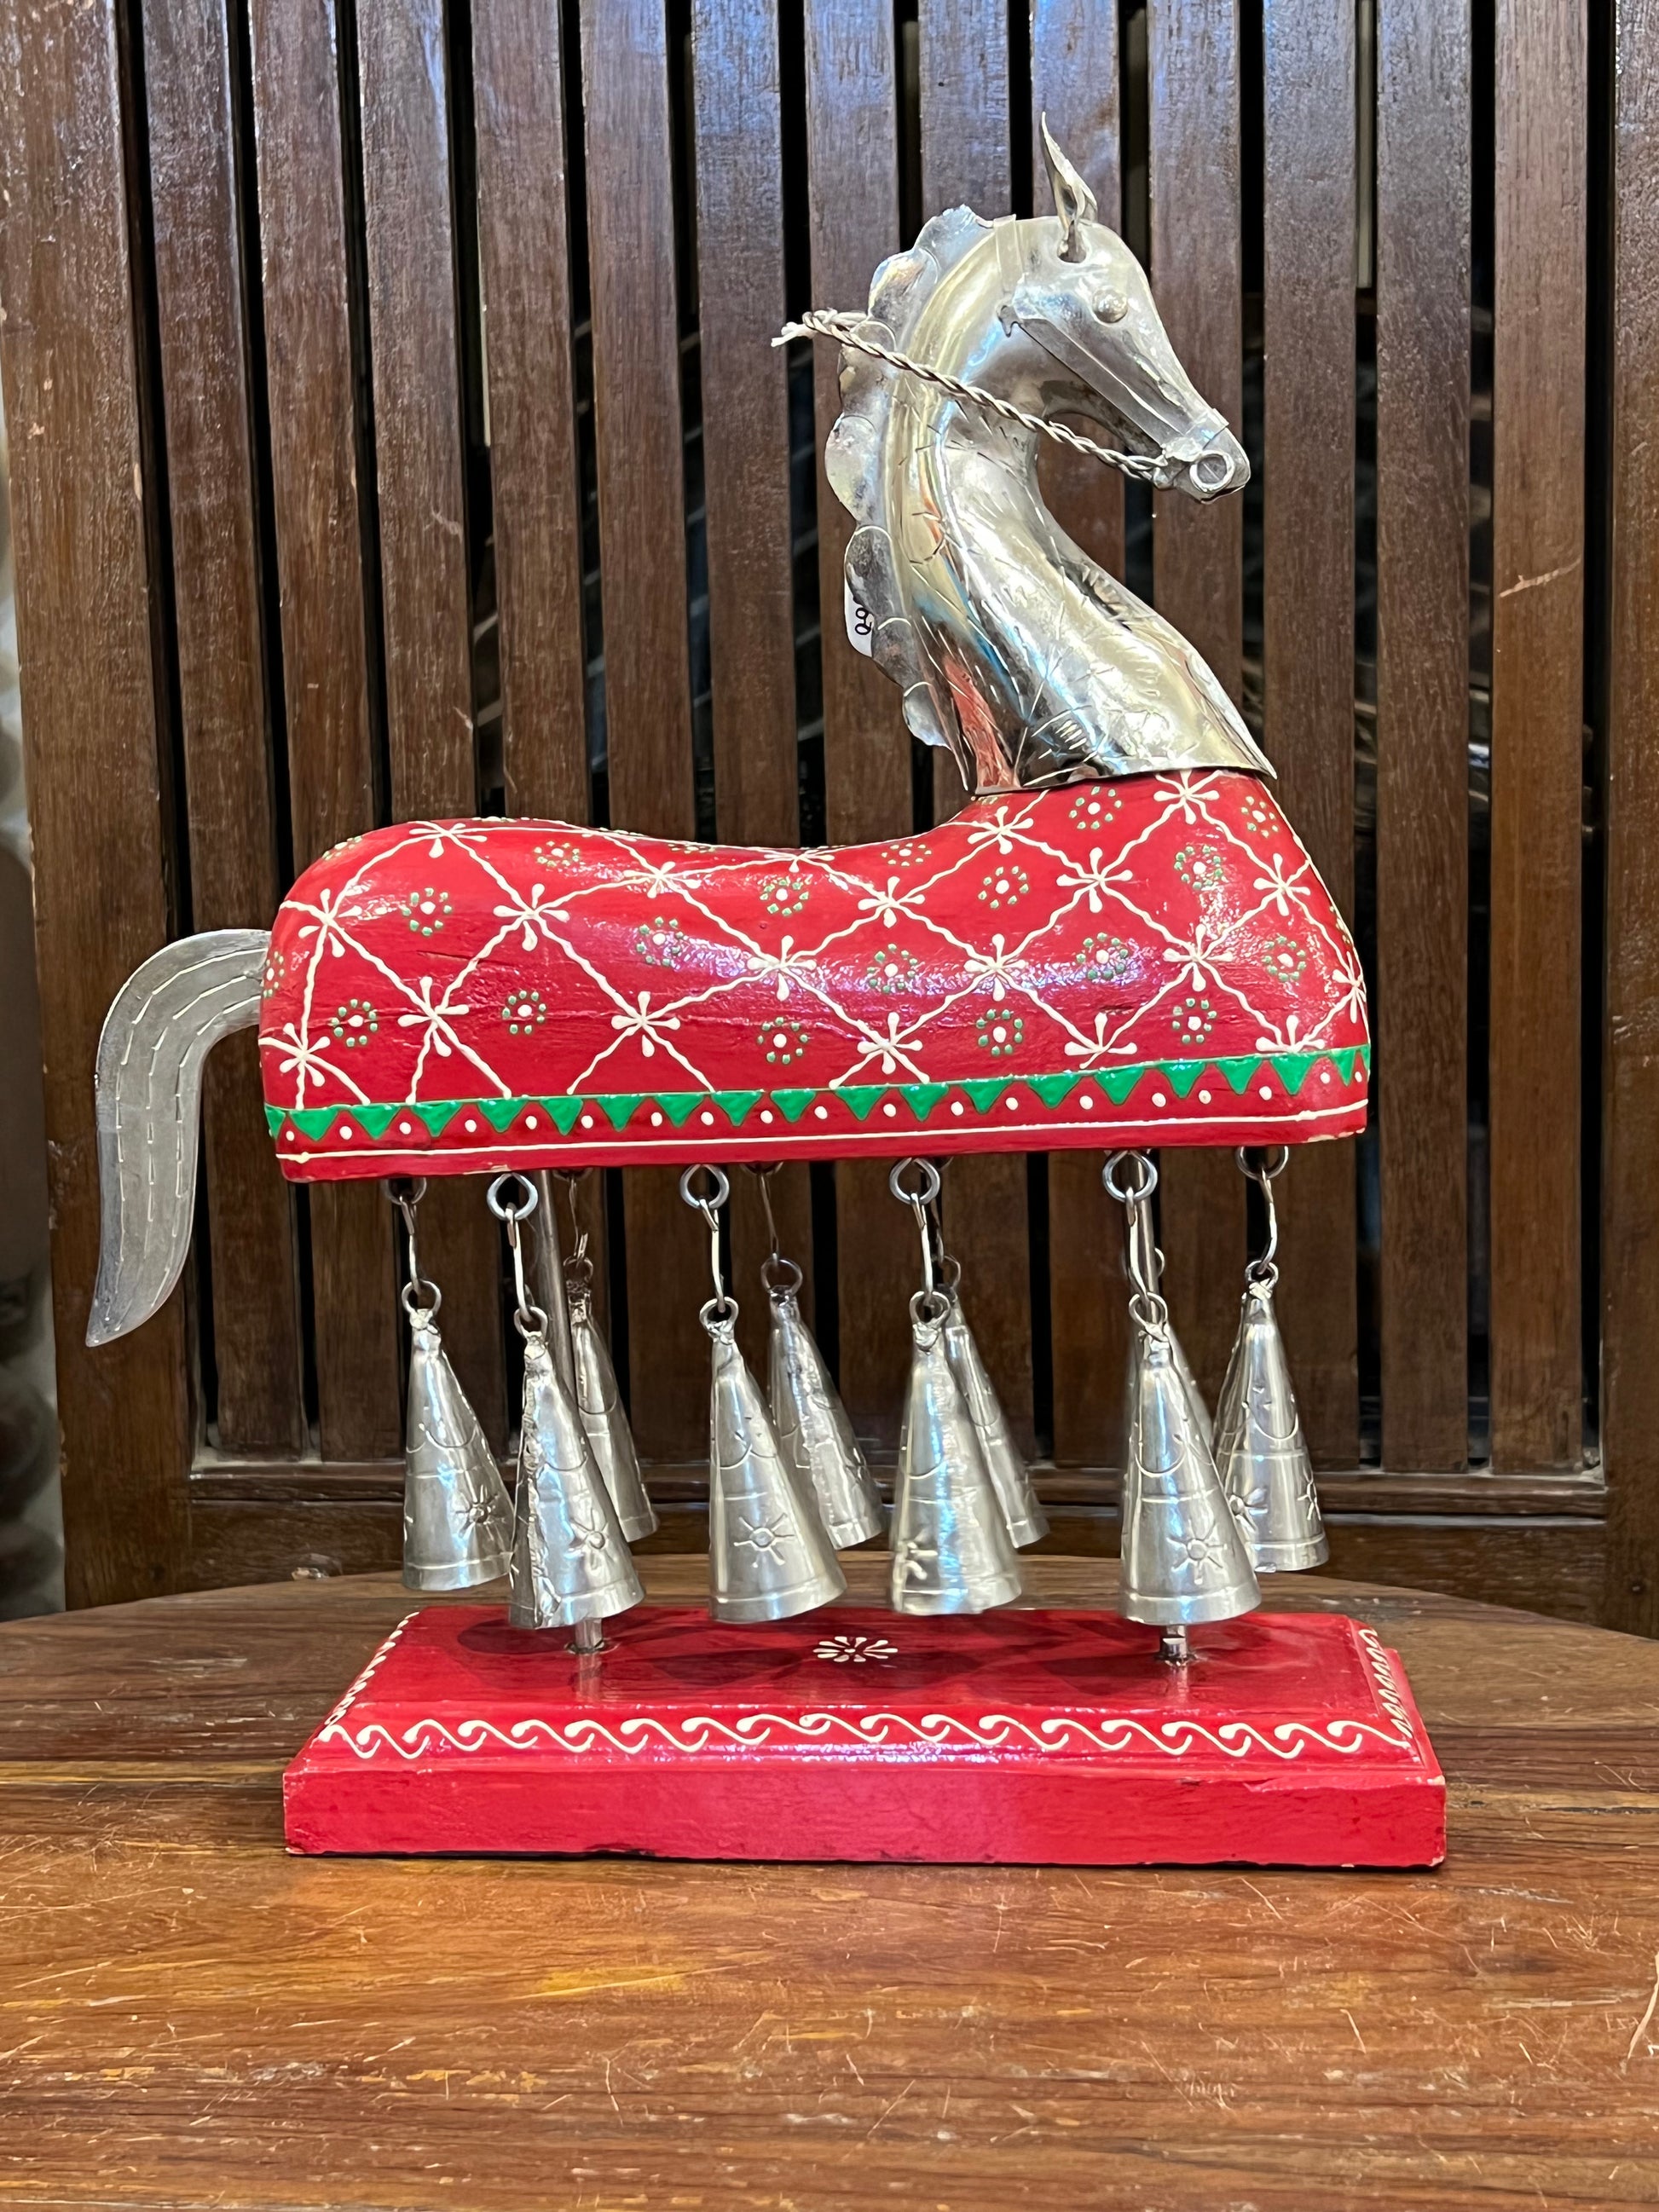 Image of Painted Horse with Bells.  The Source India is an Indian Handicraft, Home Decor, Furnishing and Textiles Store. Our Mission is to allow the enhancement of India's Culture